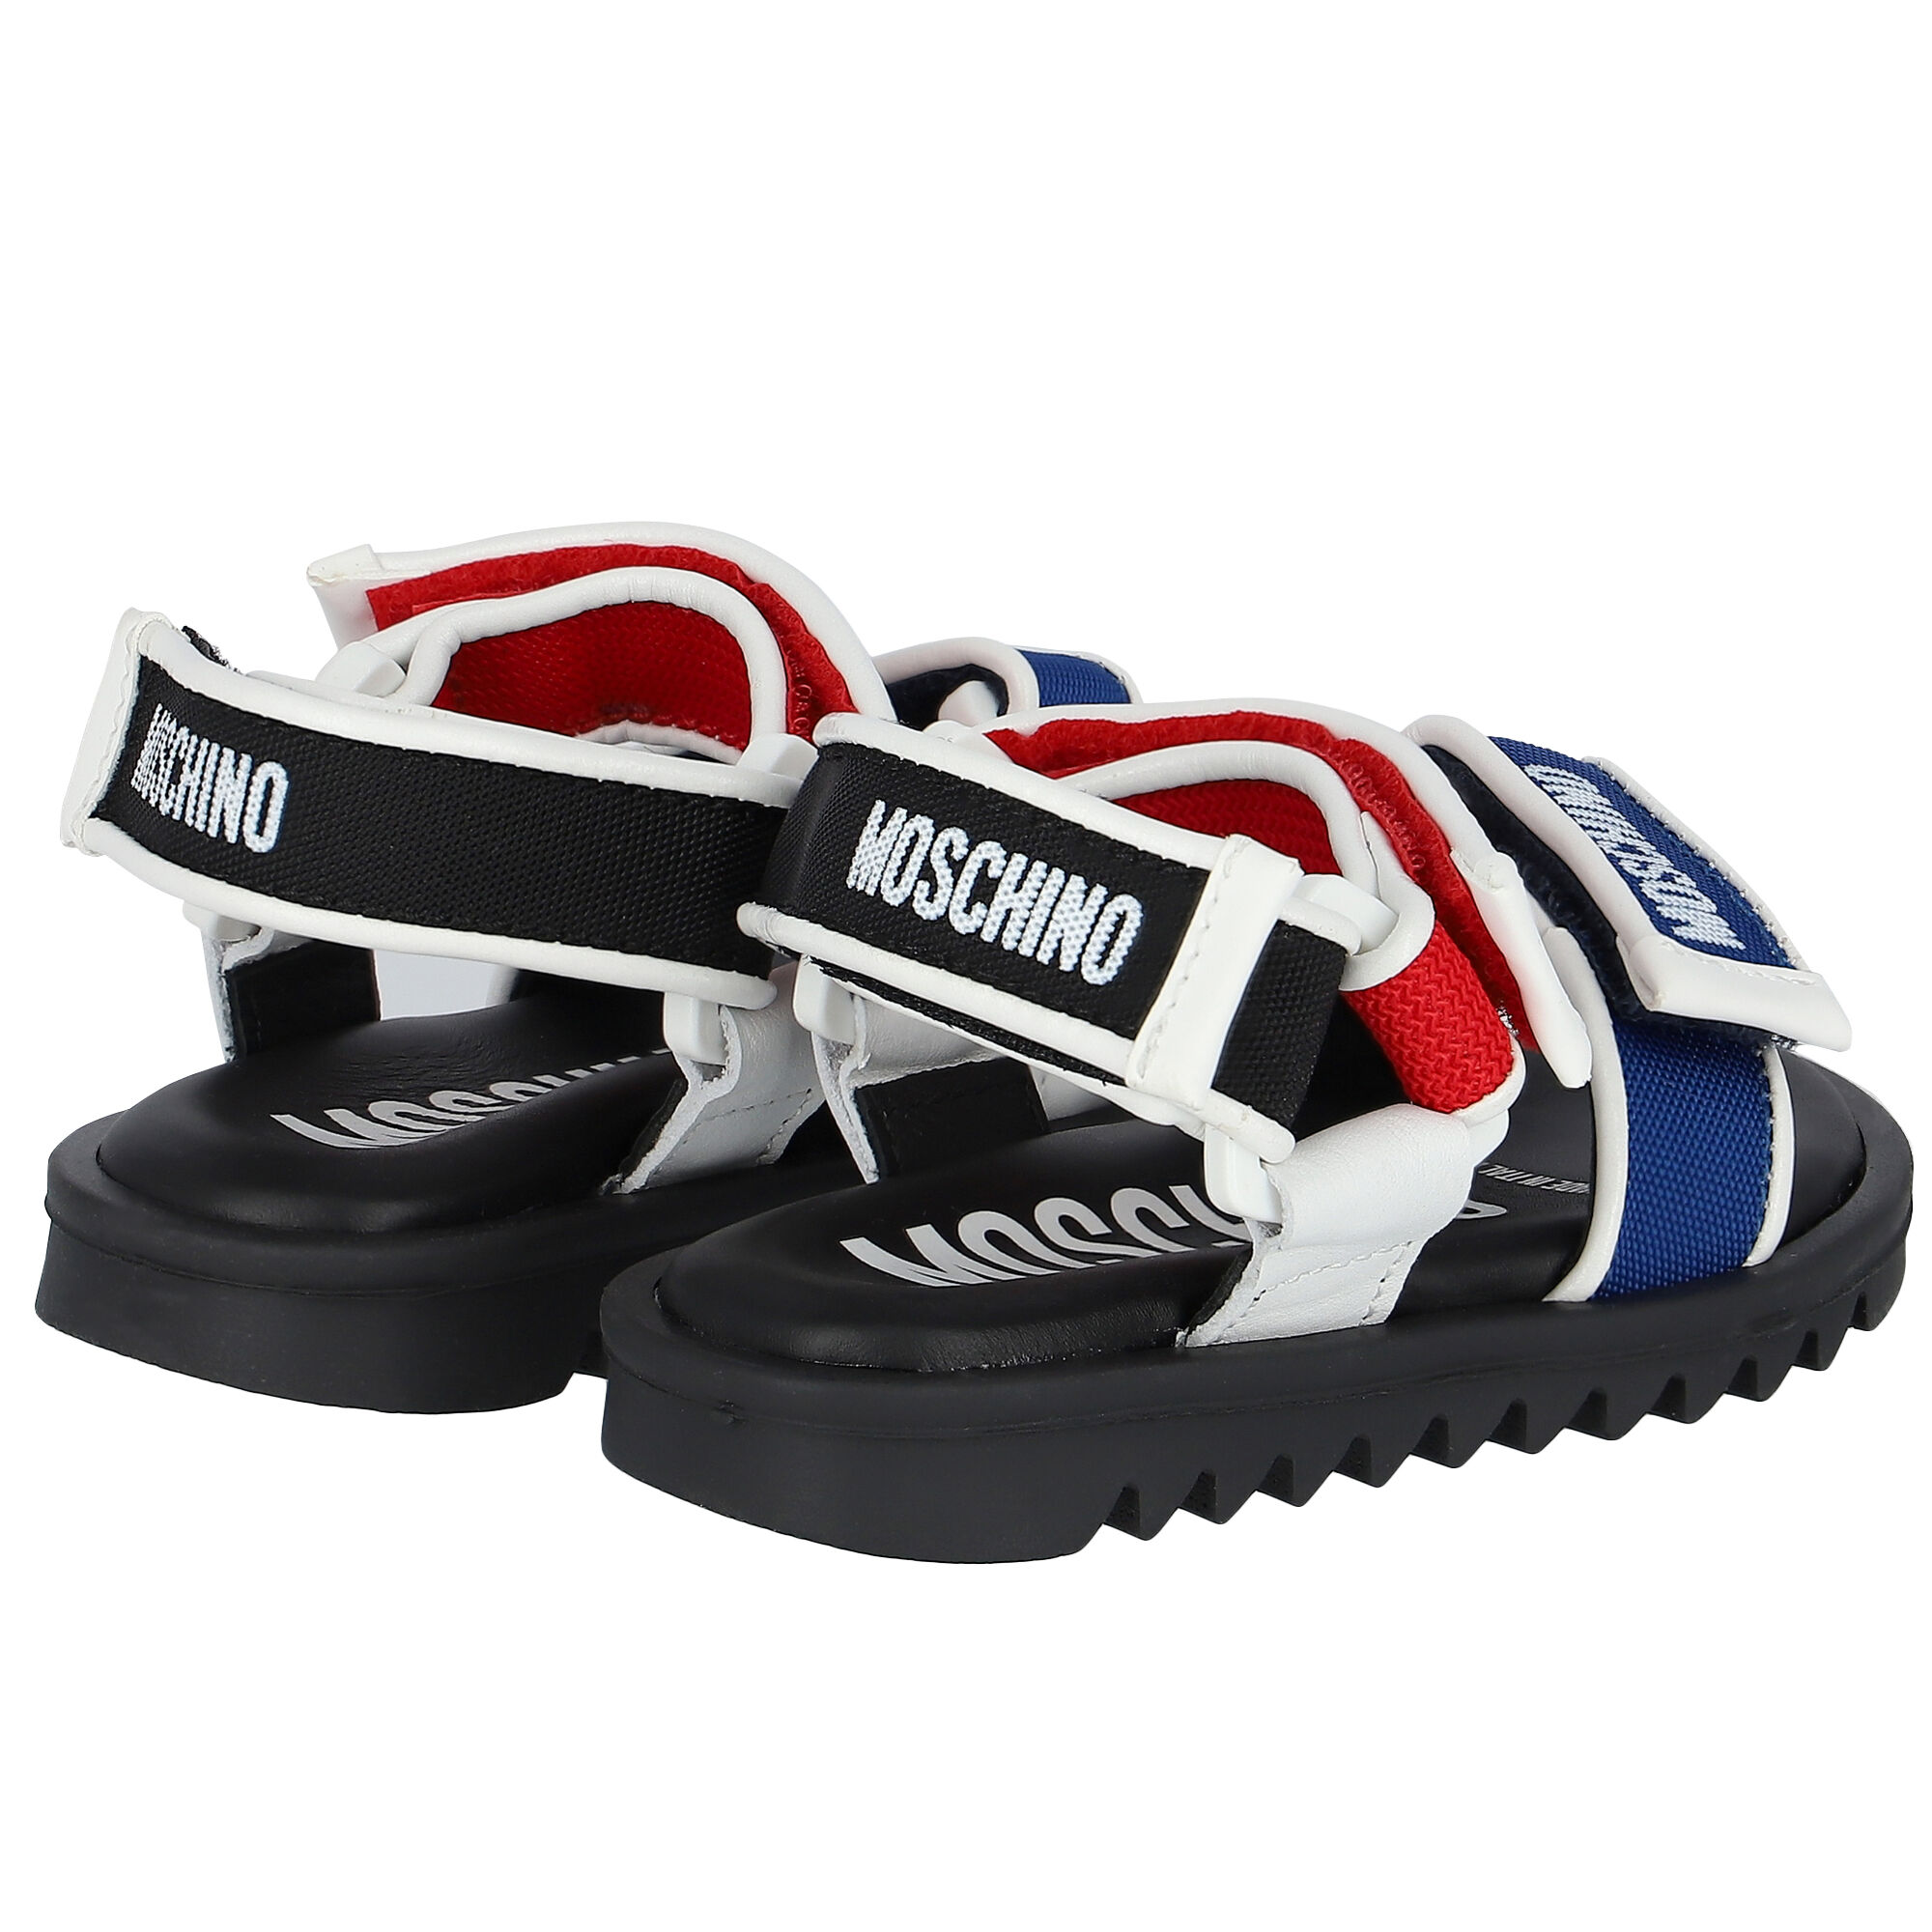 Moschino Black #39;Couture#39; Sandals